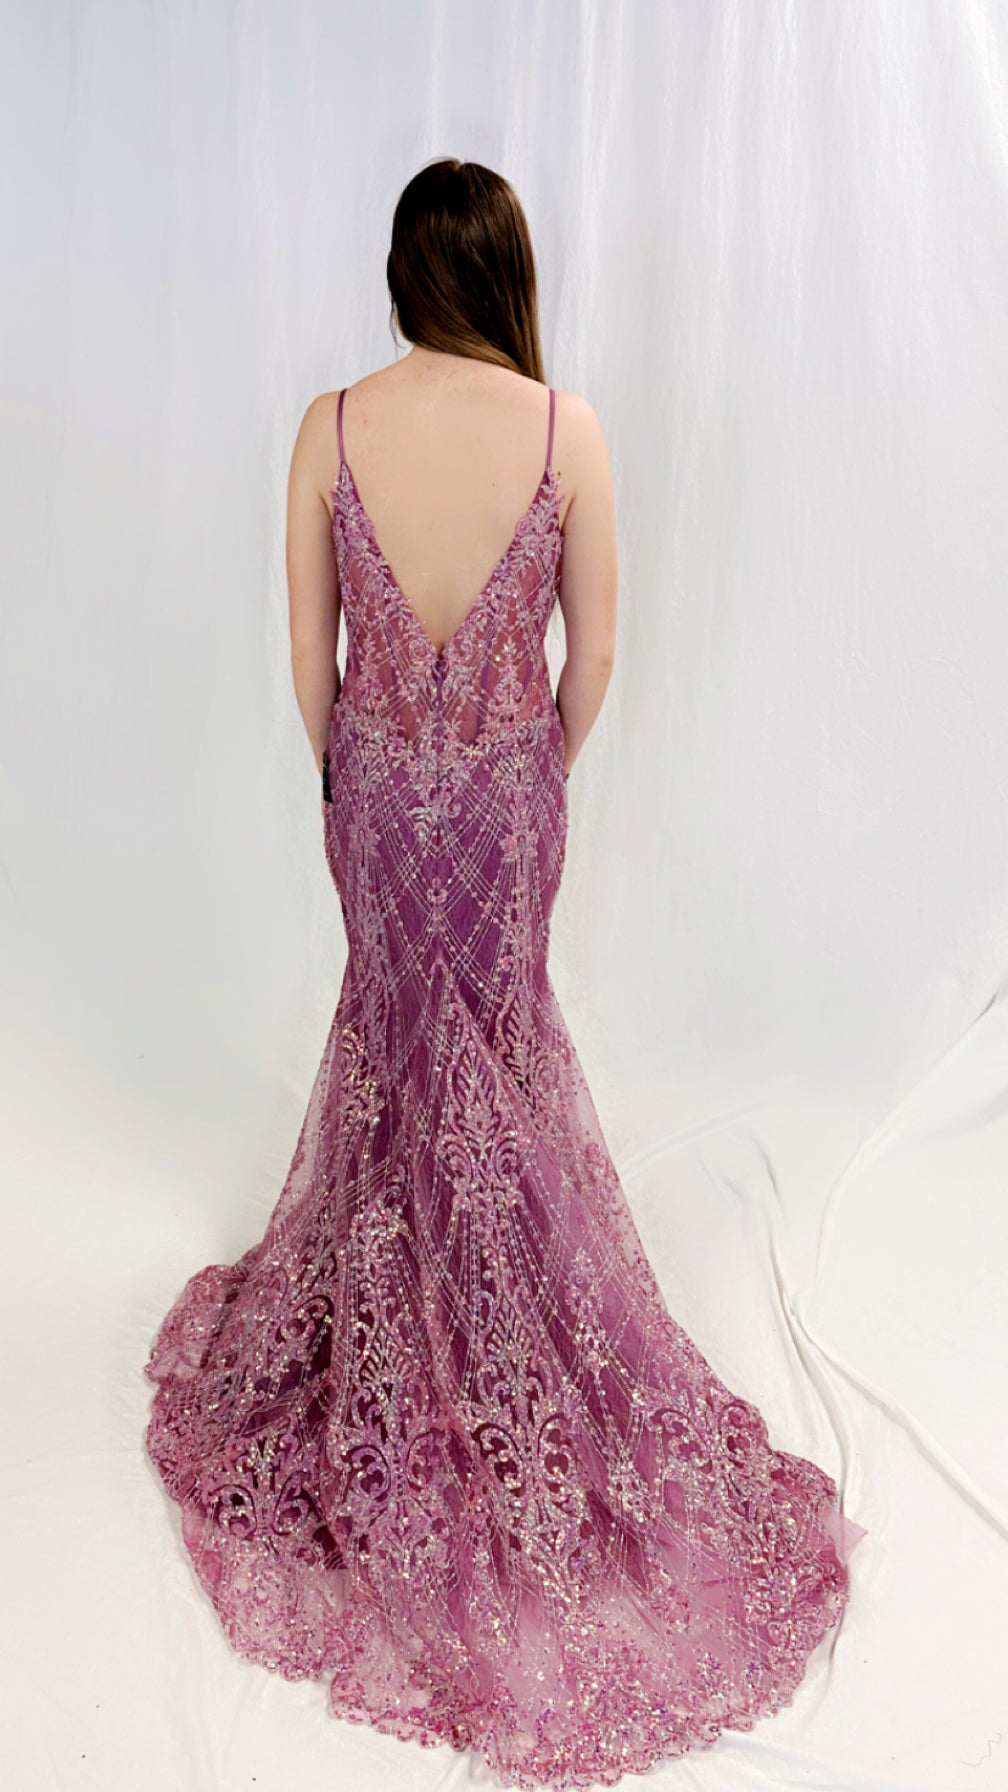 Amethyst Nicole Formal Gown (Size 12)